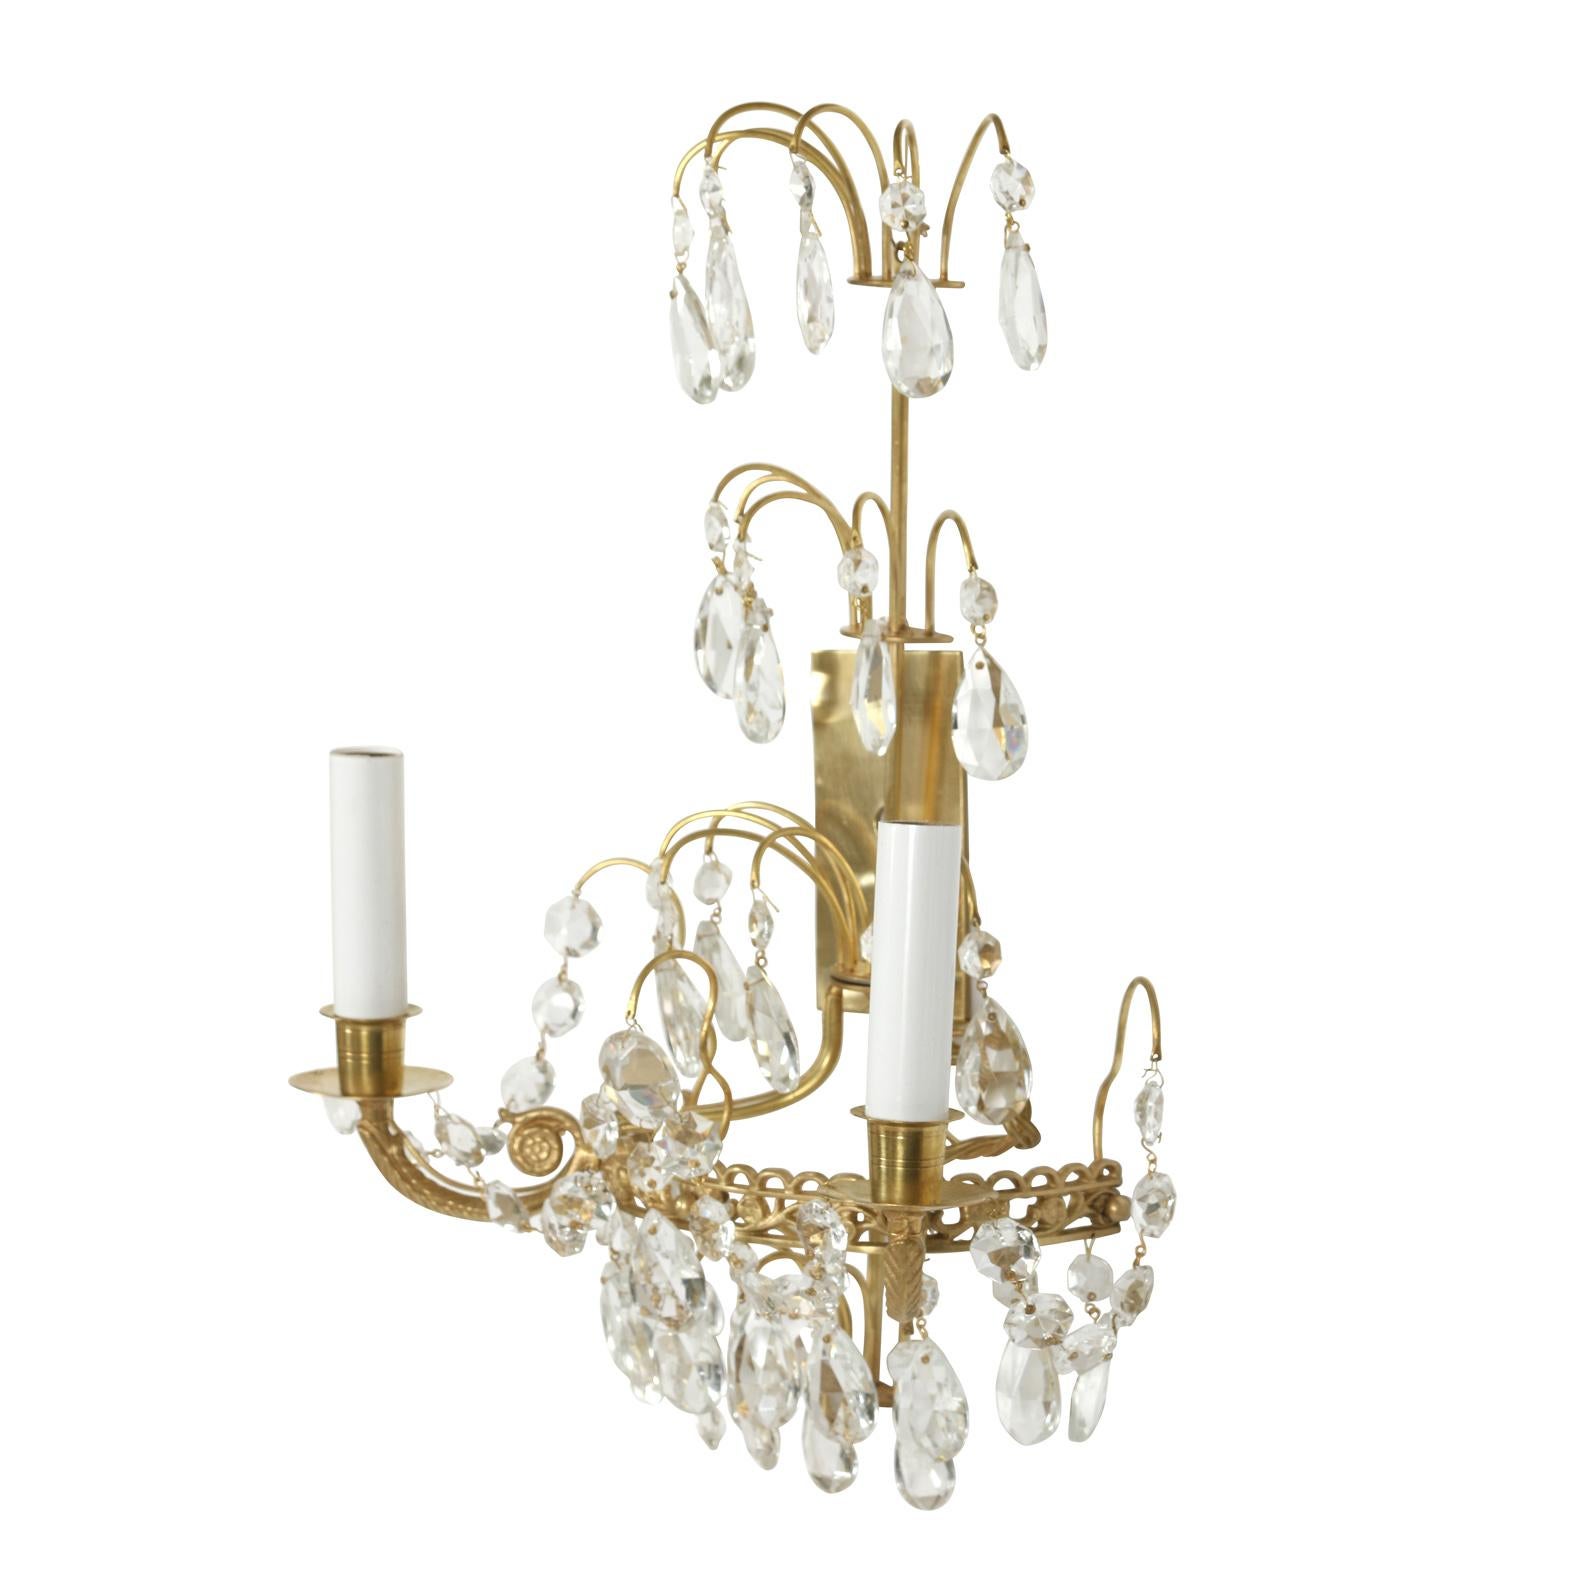 A pair of Swedish crystal and brass two-arm sconces with three tiers of crystal prisms.